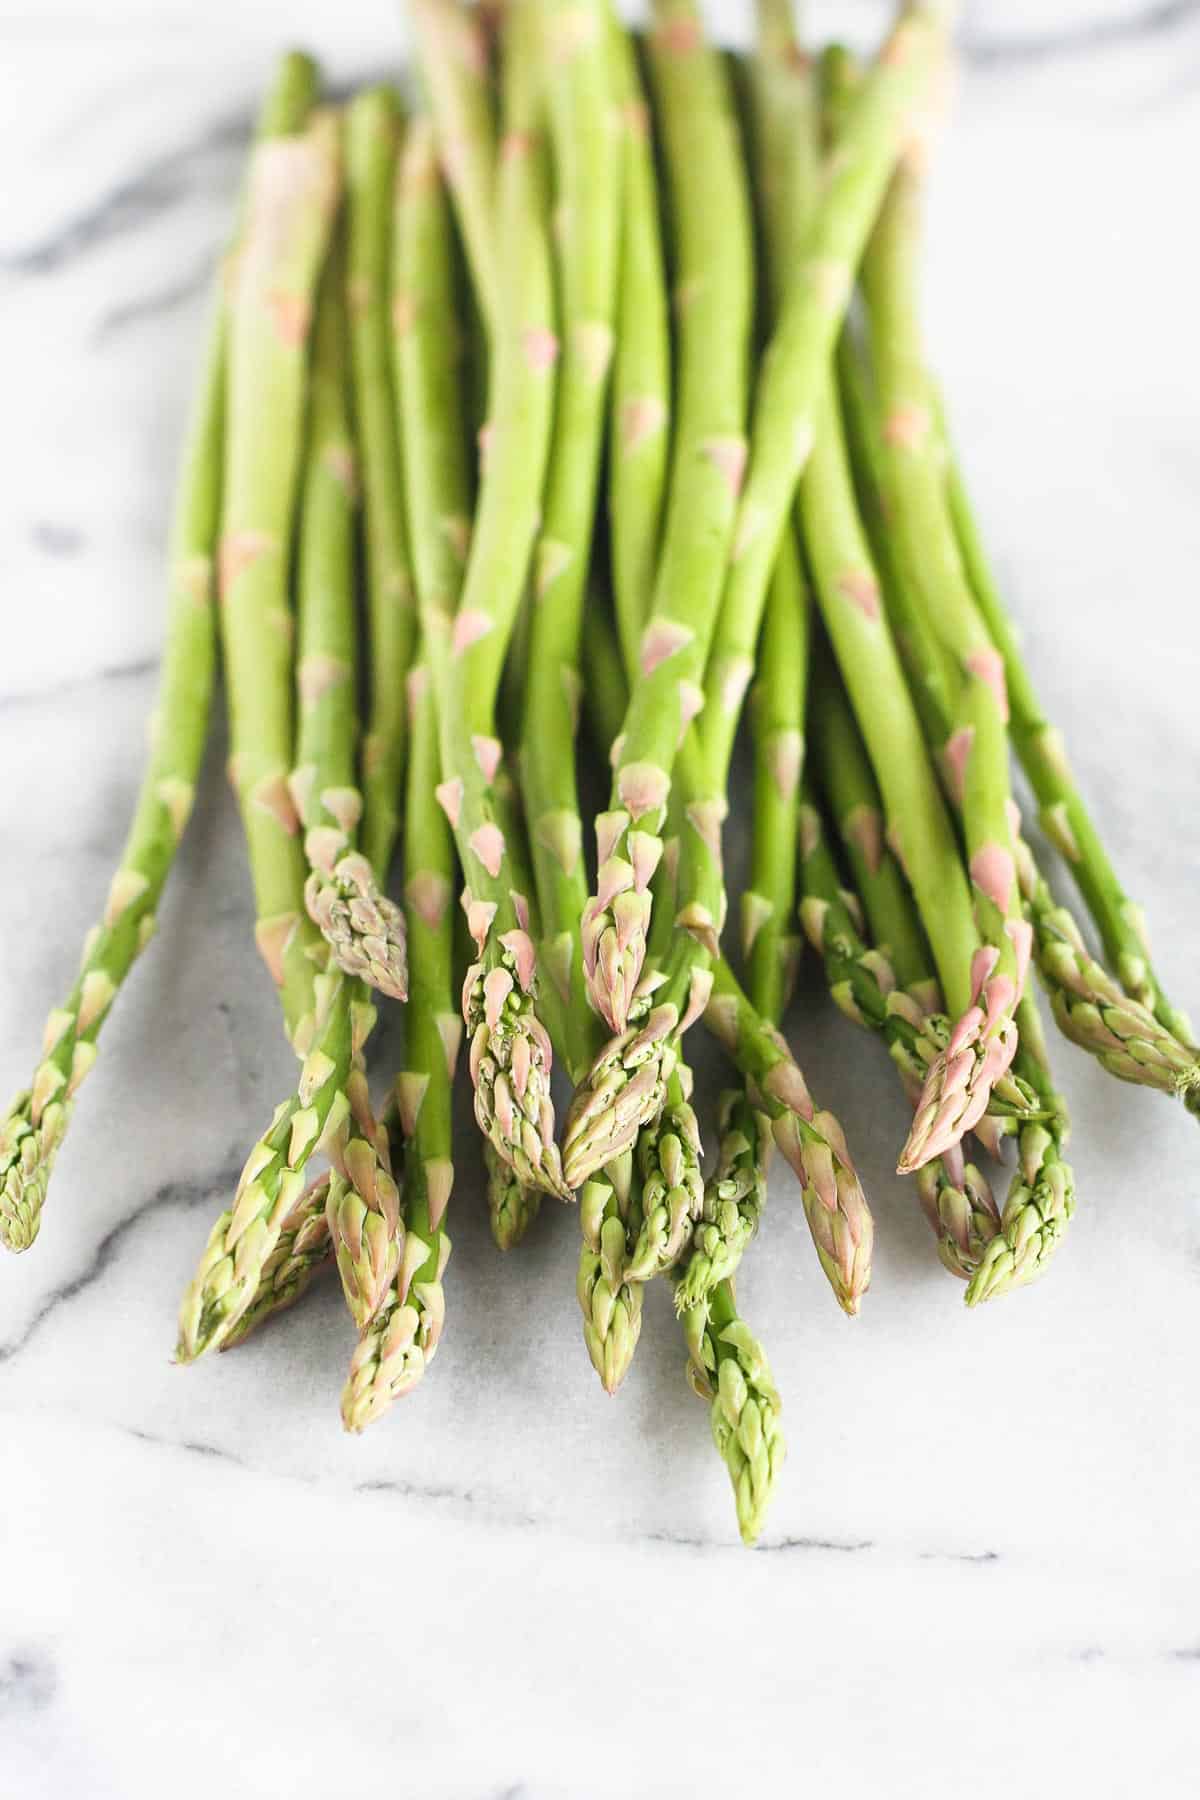 Asparagus spears on a white background.